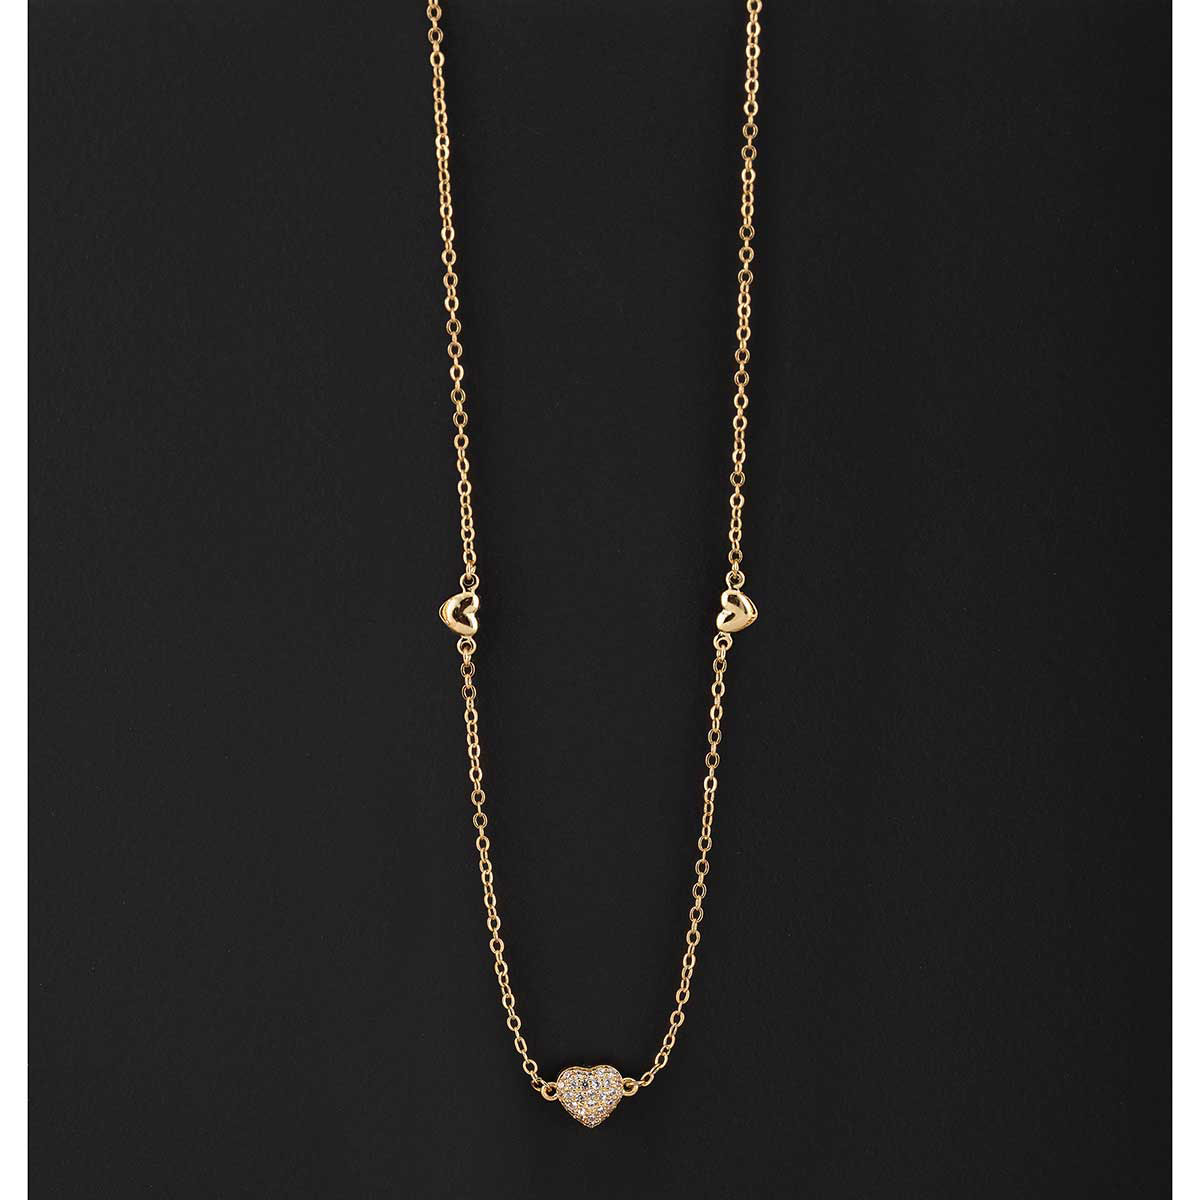 NECKLACE HEART GOLD